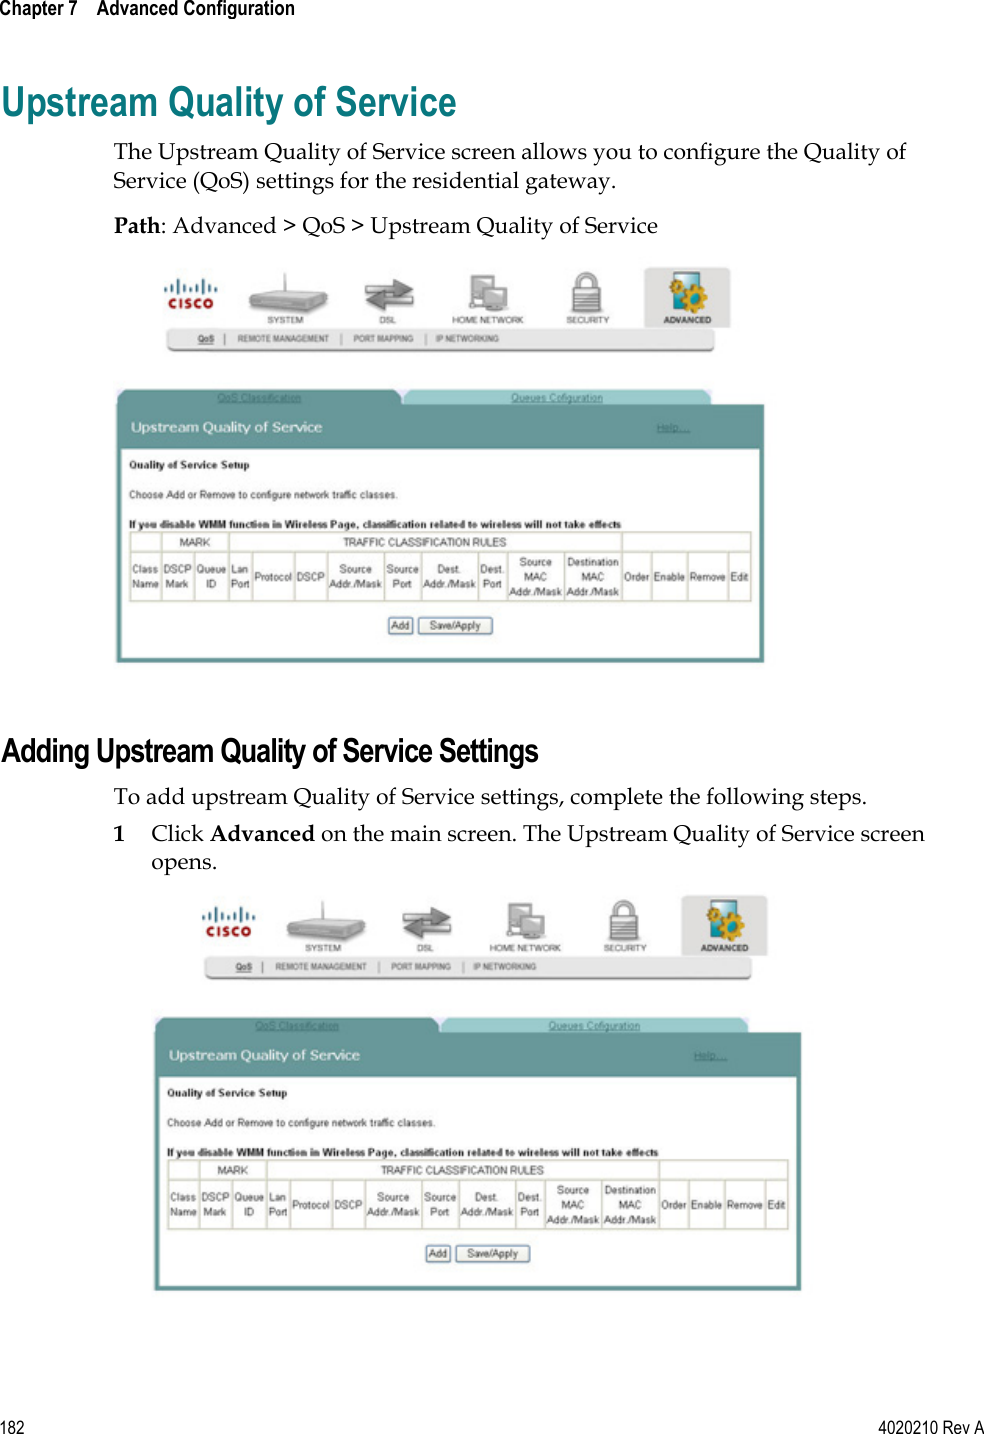  Chapter 7    Advanced Configuration   182  4020210 Rev A Upstream Quality of Service The Upstream Quality of Service screen allows you to configure the Quality of Service (QoS) settings for the residential gateway.  Path: Advanced &gt; QoS &gt; Upstream Quality of Service   Adding Upstream Quality of Service Settings To add upstream Quality of Service settings, complete the following steps. 1 Click Advanced on the main screen. The Upstream Quality of Service screen opens.  